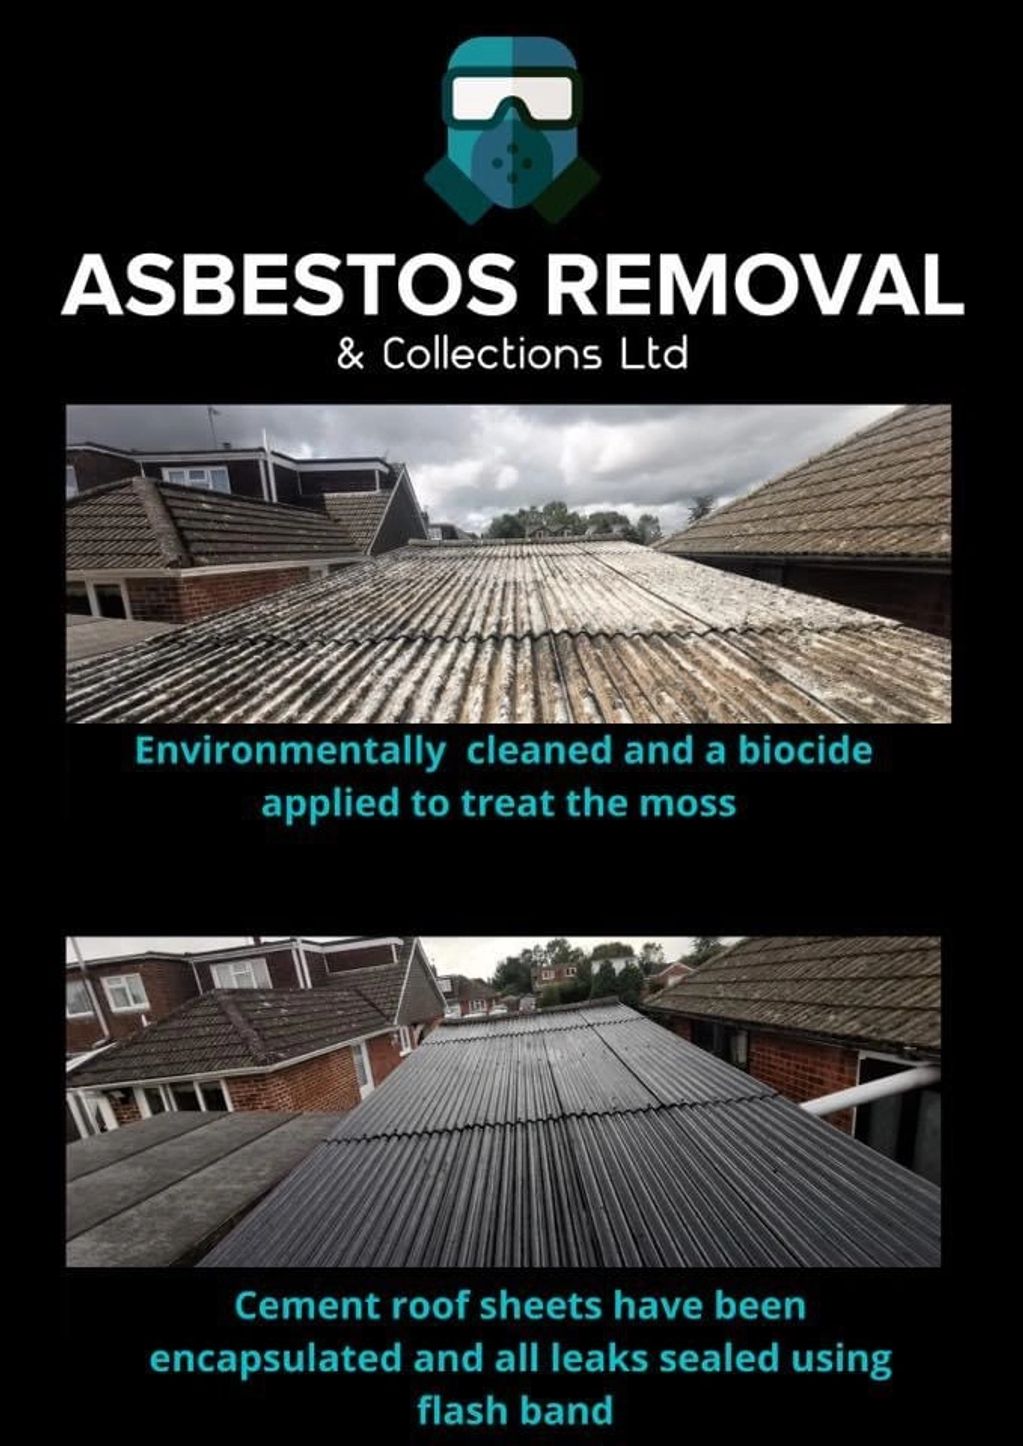 Before and after pictures following encapsulation of asbestos cement roof sheets